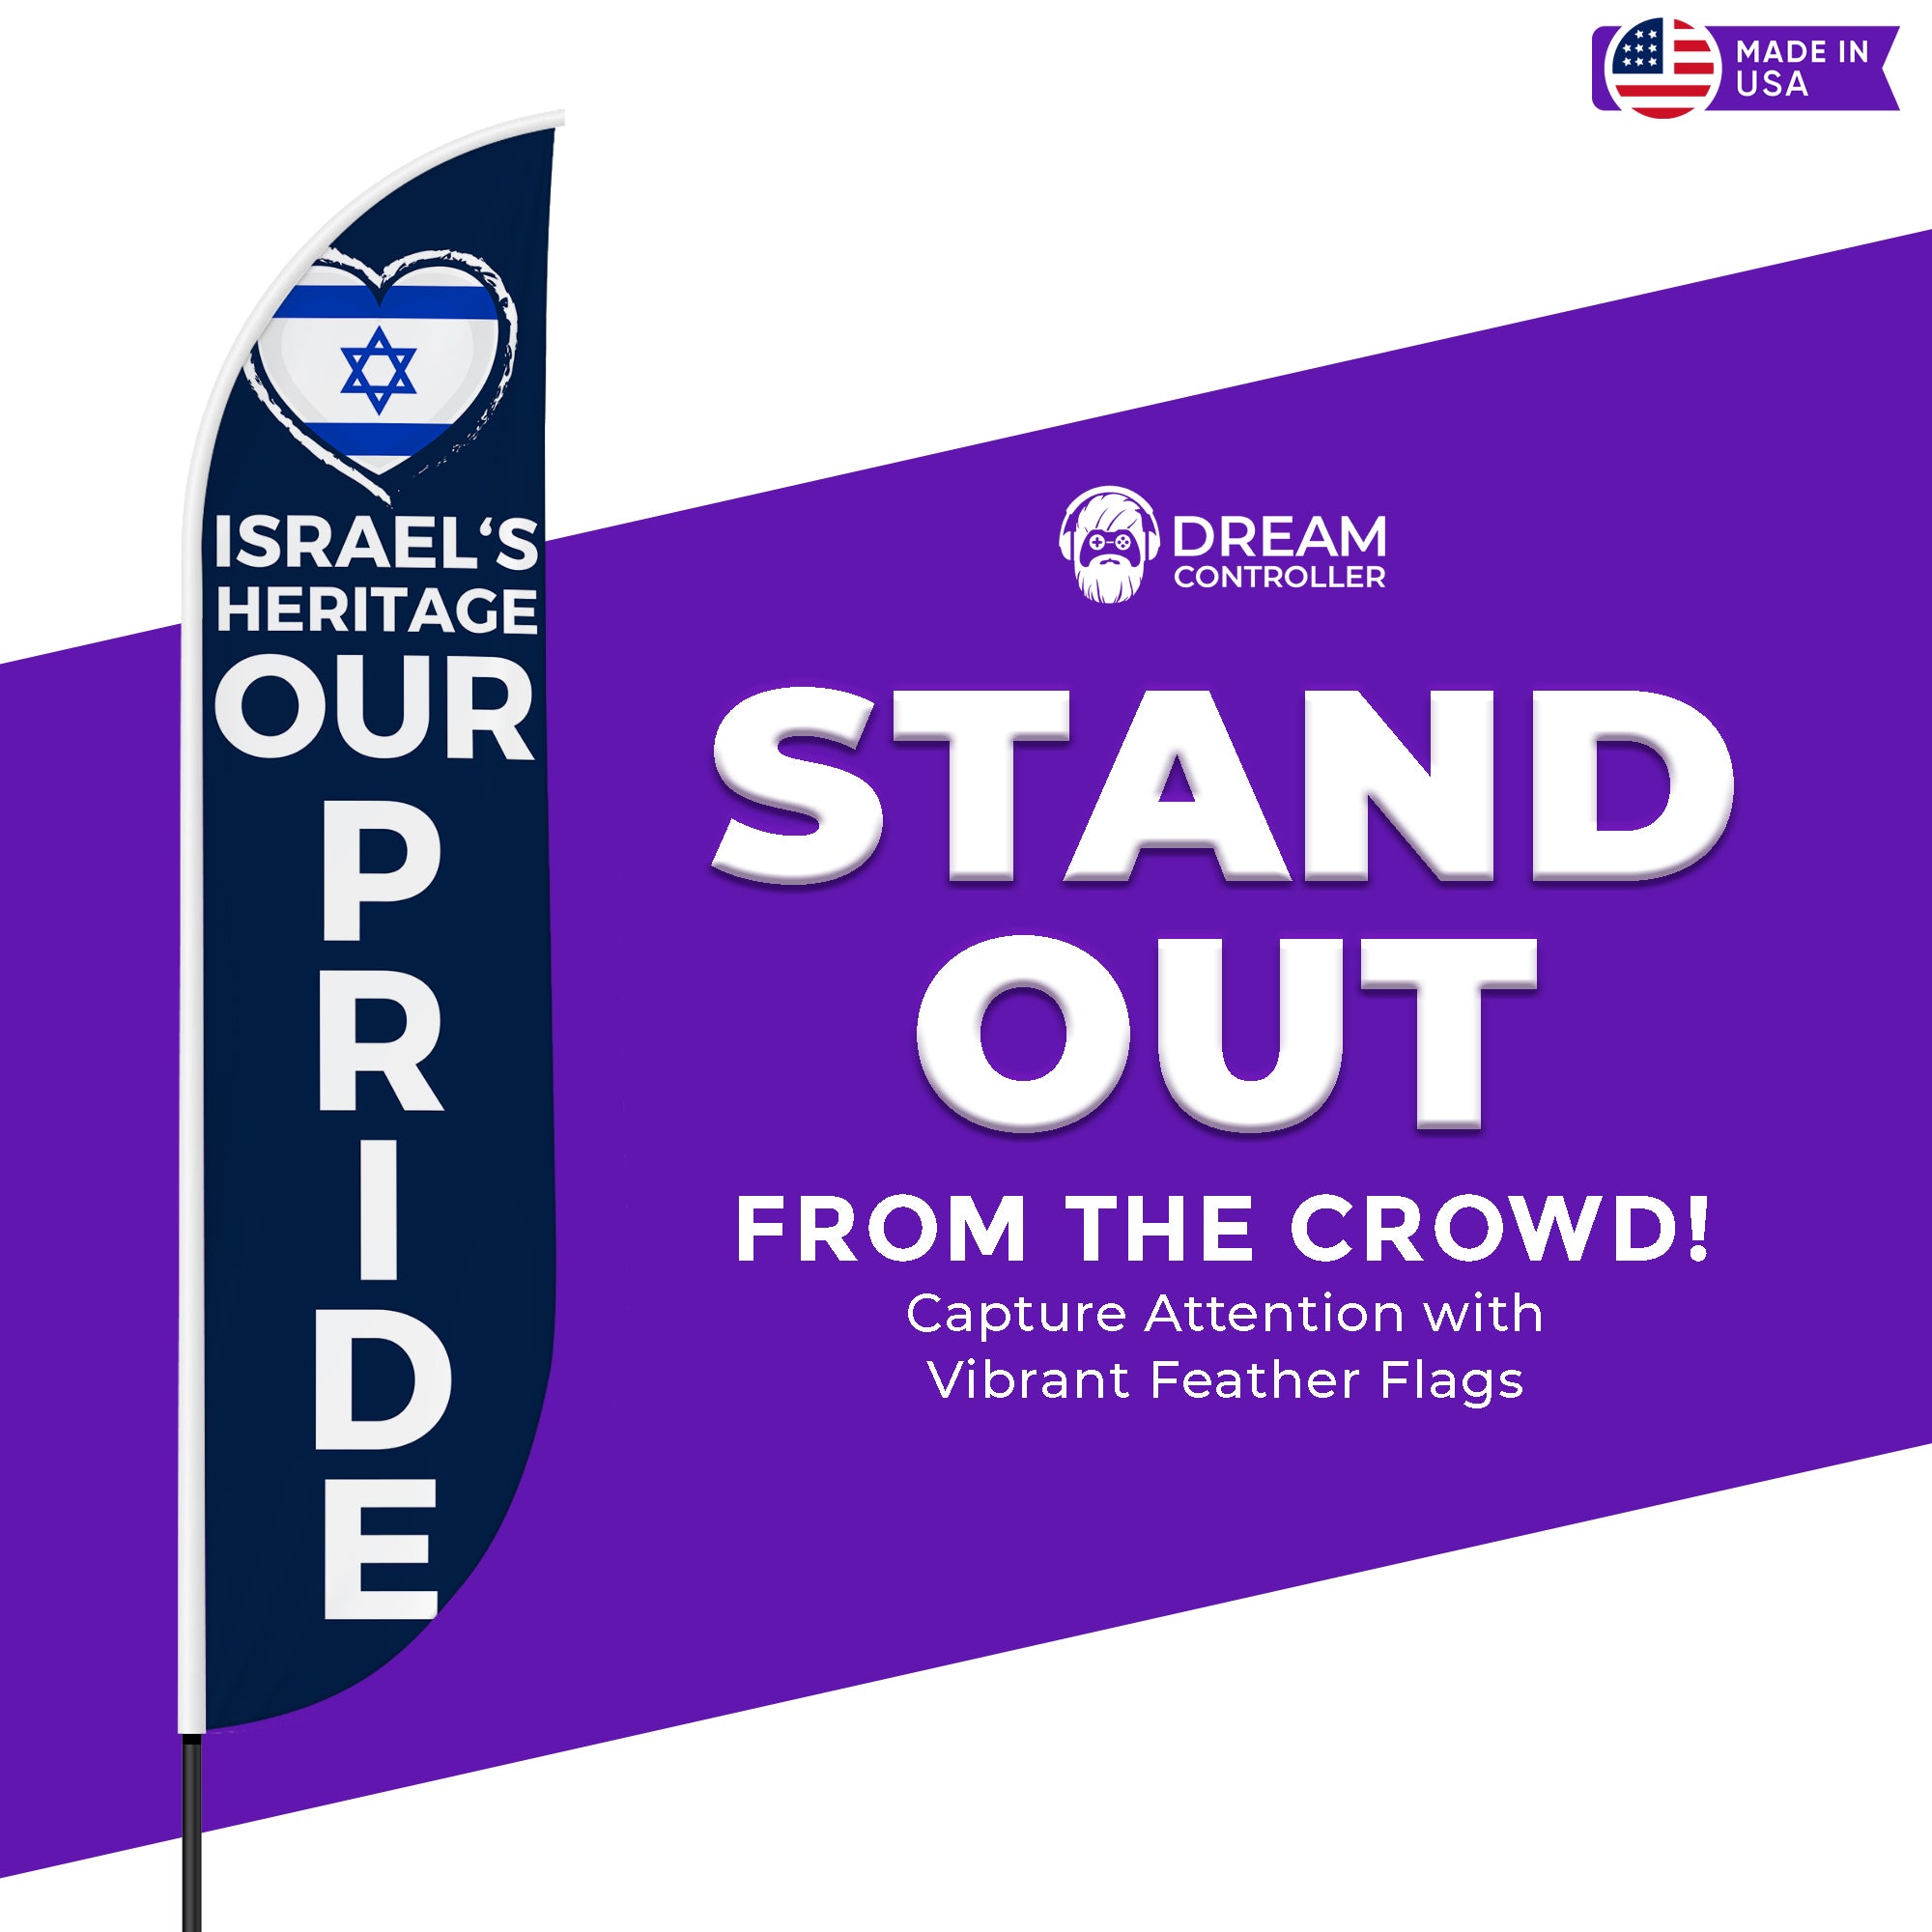 Israel's Heritage Our Pride Feather Flag